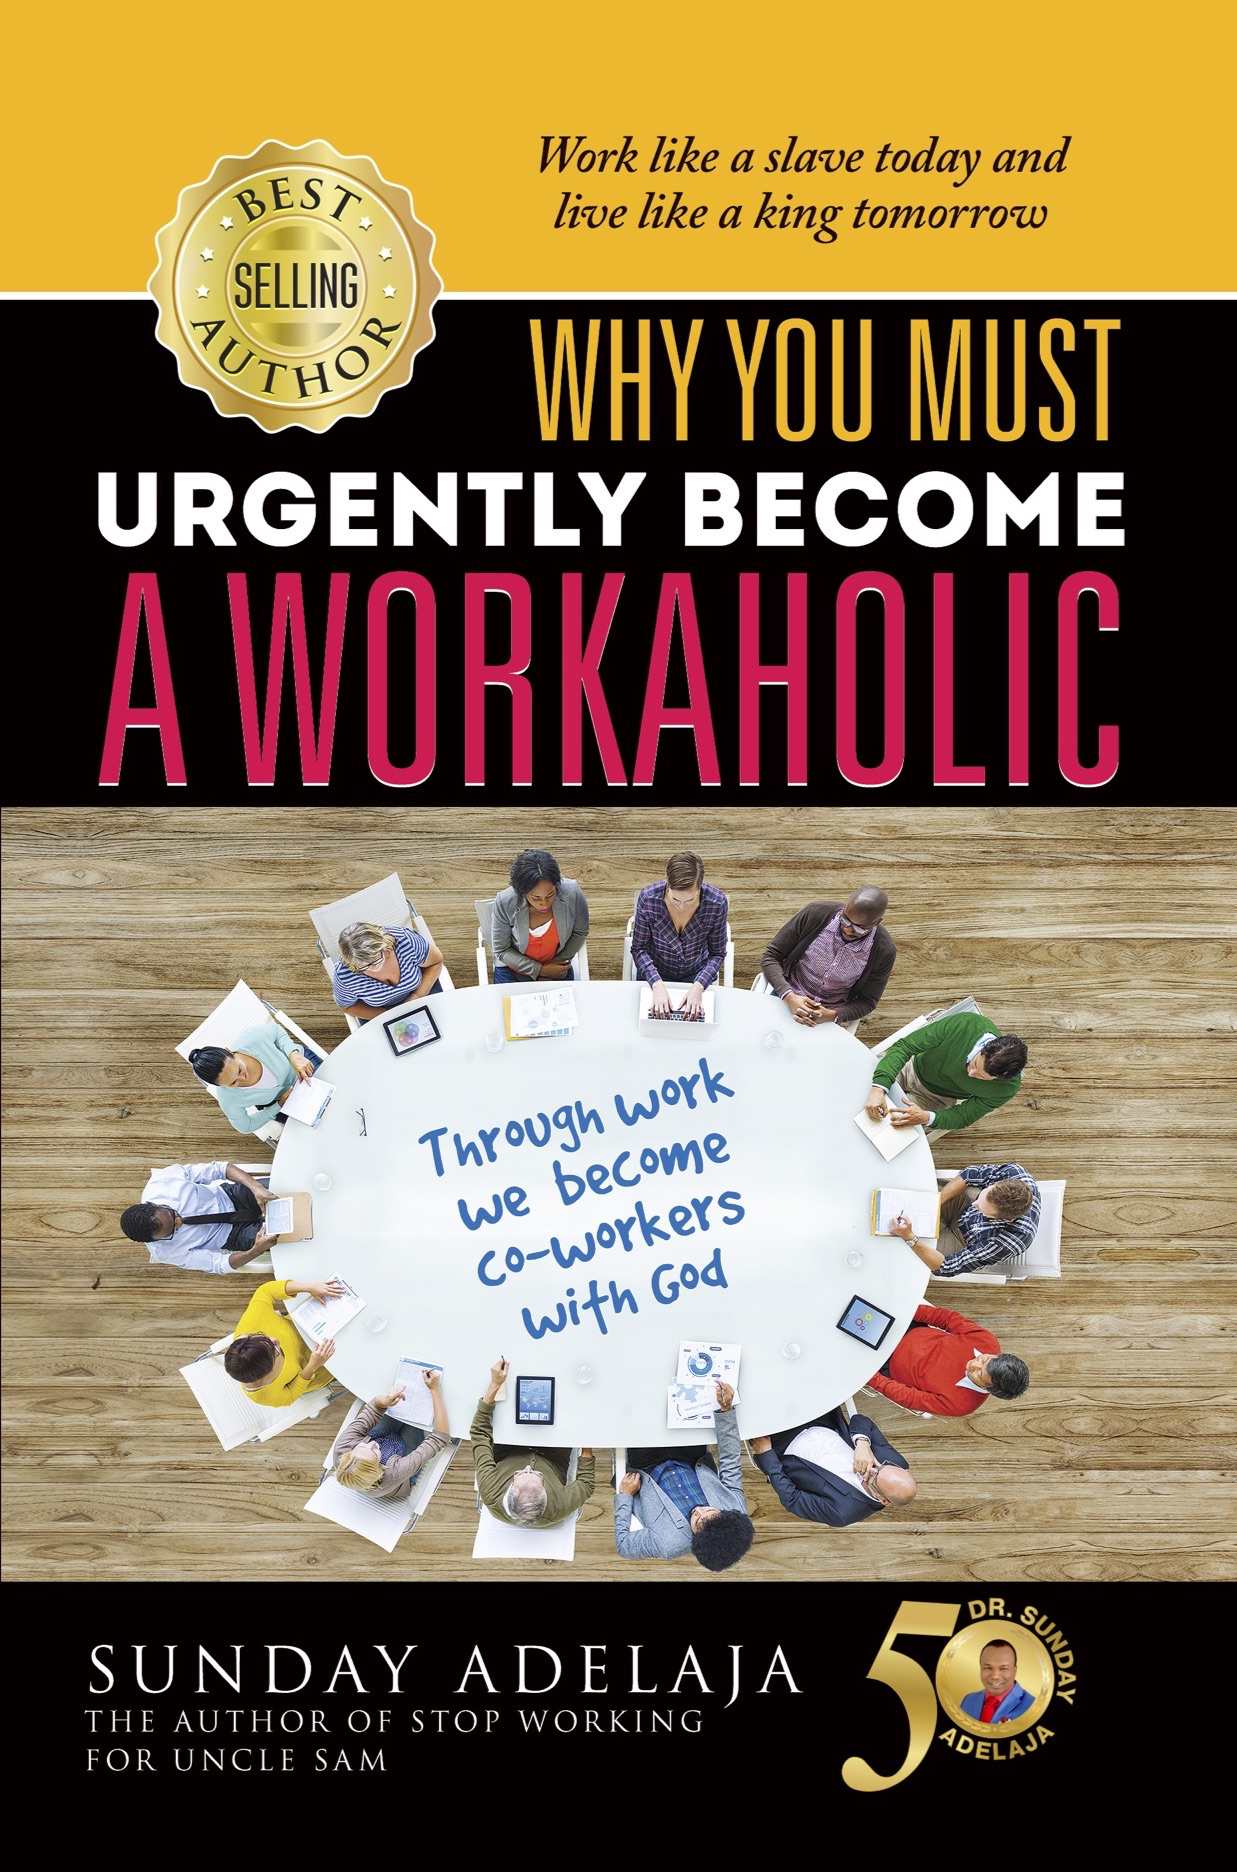 Why-You-Need-To-Urgently-Become-A-Workaholic